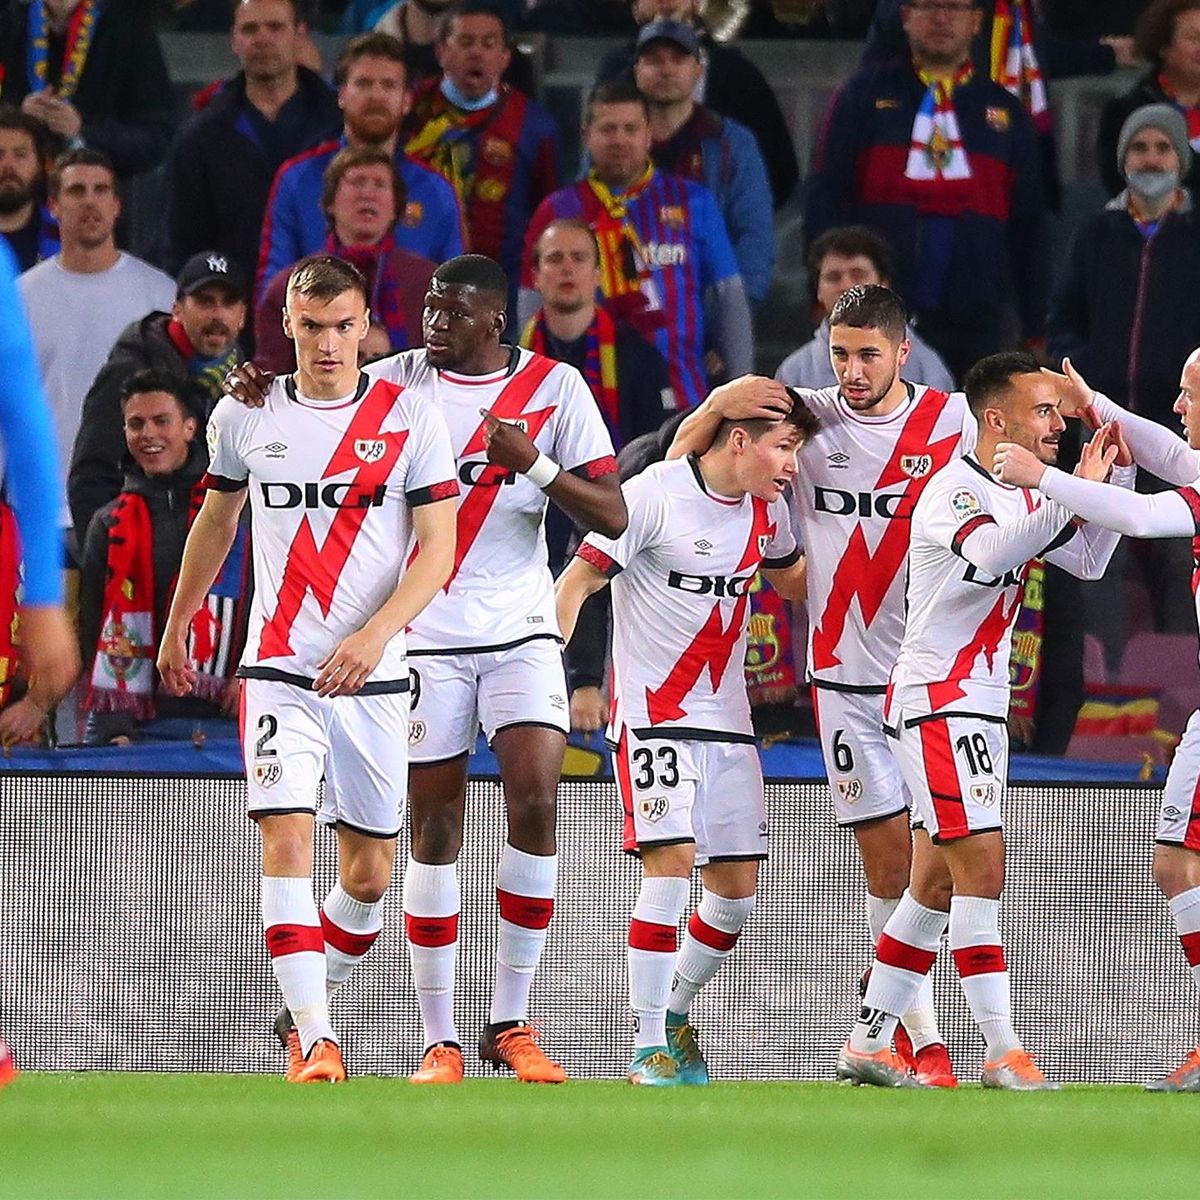 Barcelona 0-1 Rayo Vallecano: Another home defeat all but ends Barca's slim Liga title hopes